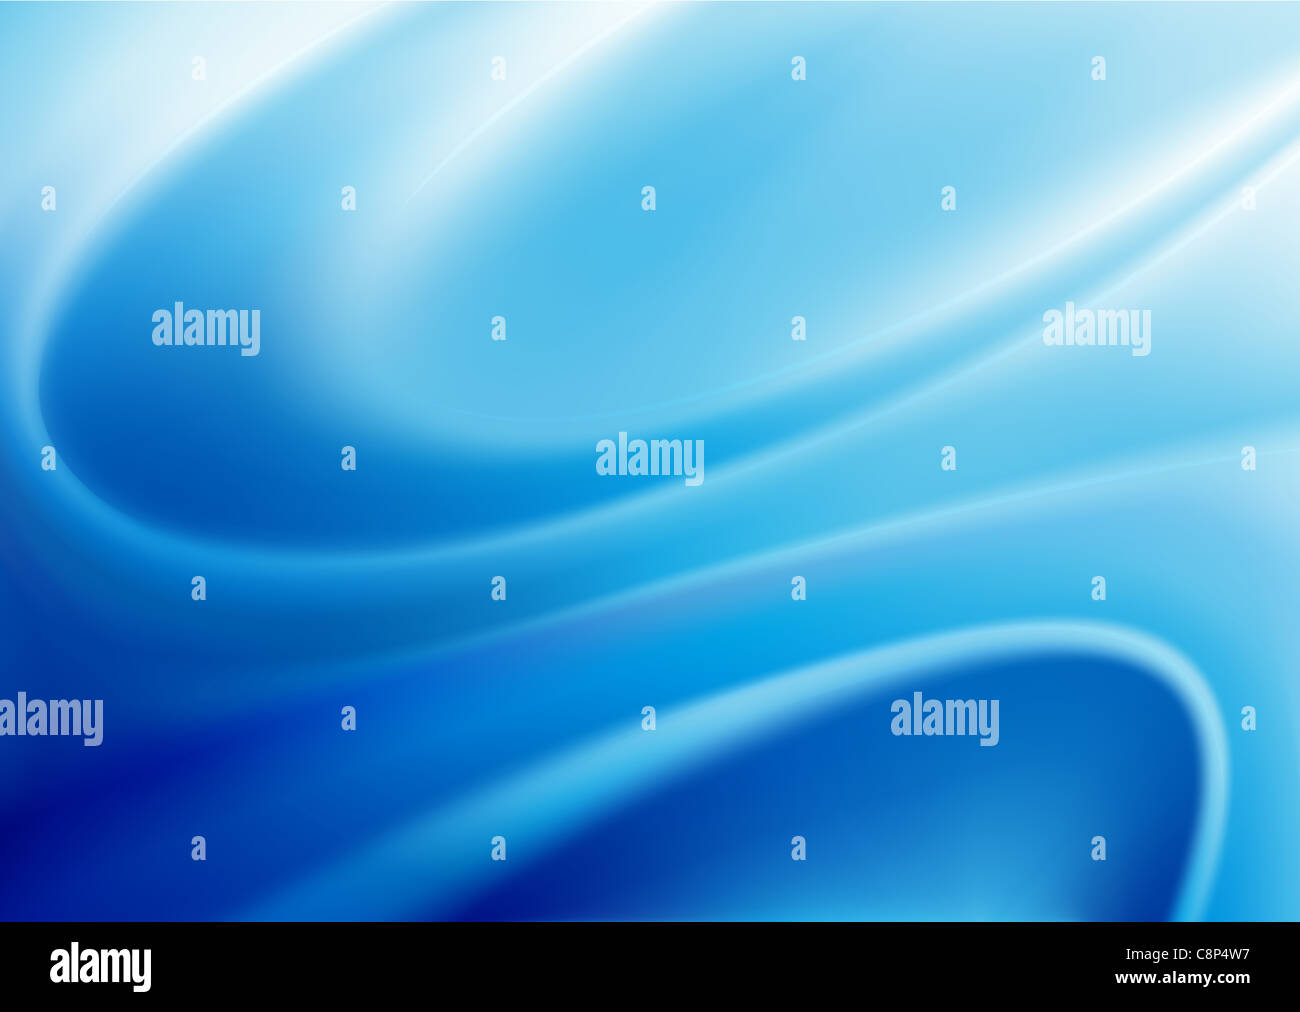 illustration of blue abstract background made of light splashes and curved lines Stock Photo